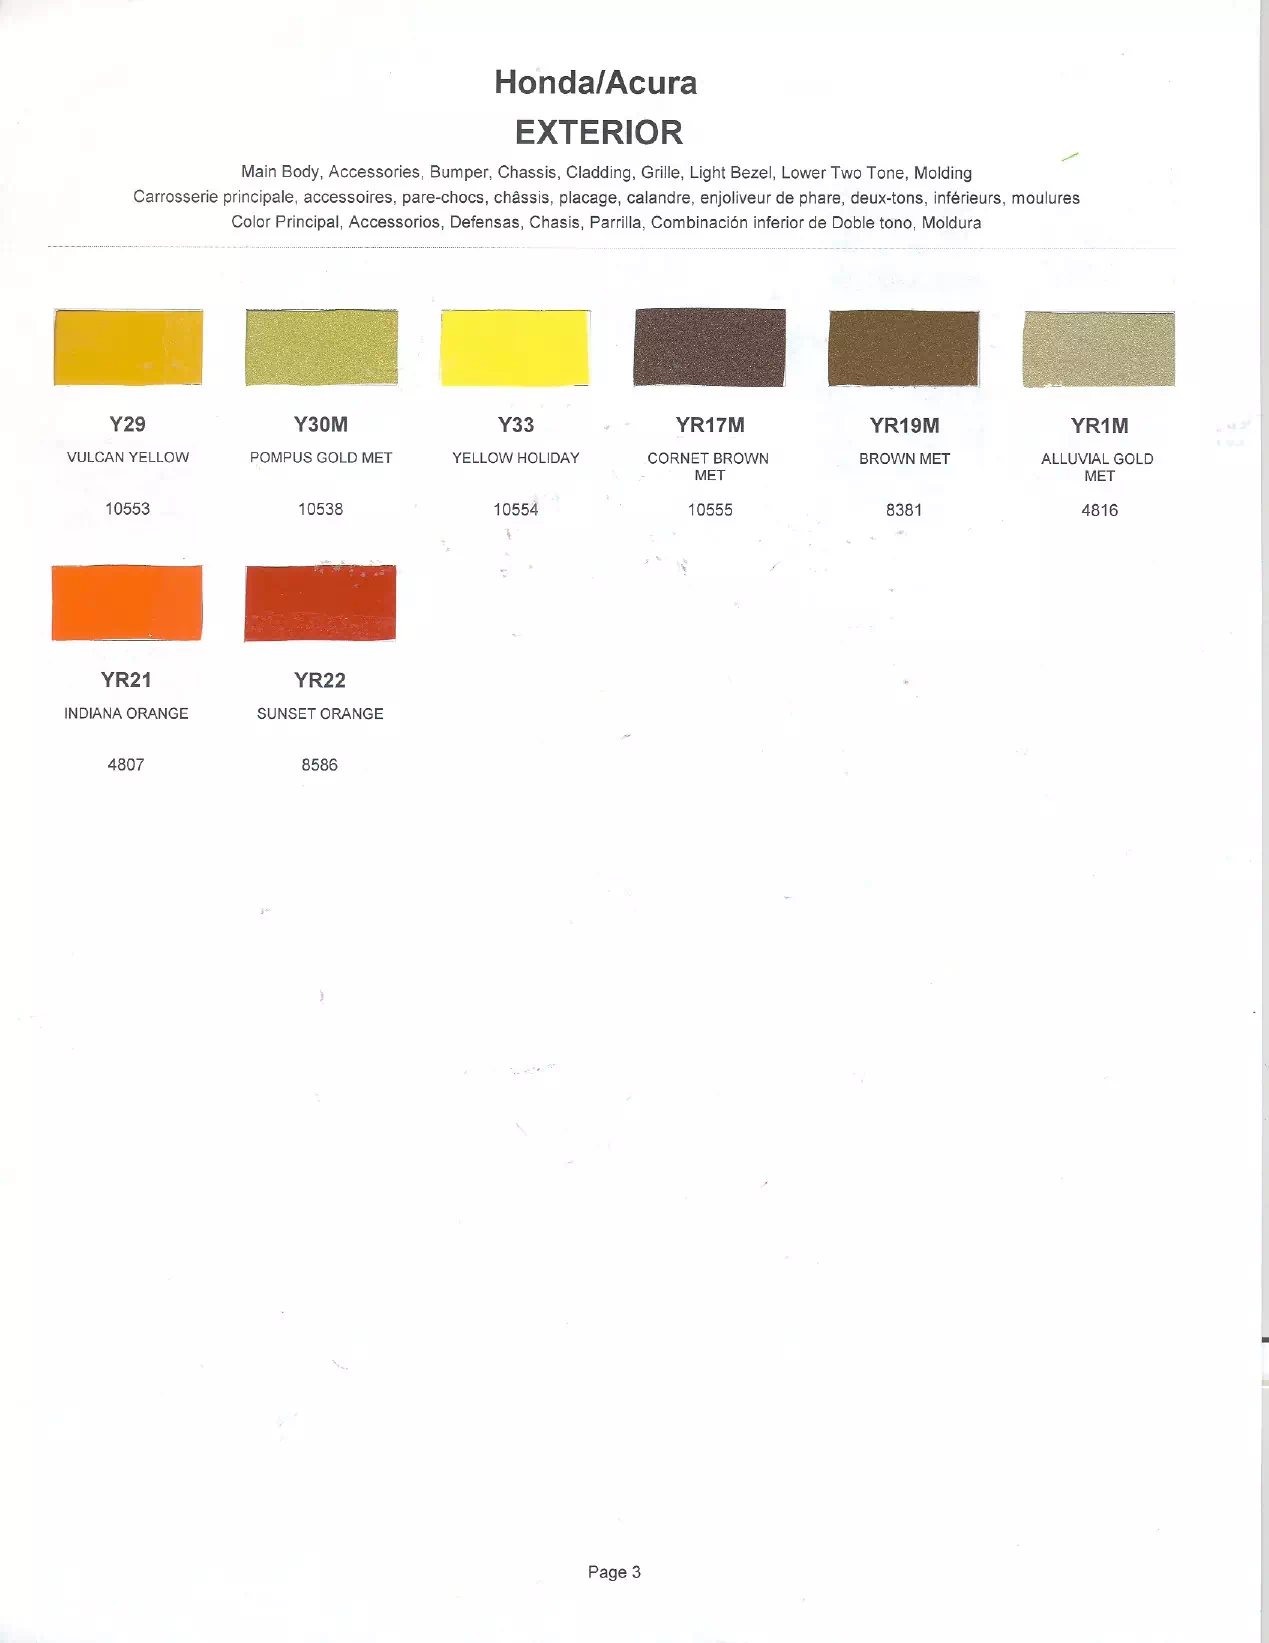 Exterior paint chips and their ordering codes for Honda Vehicles